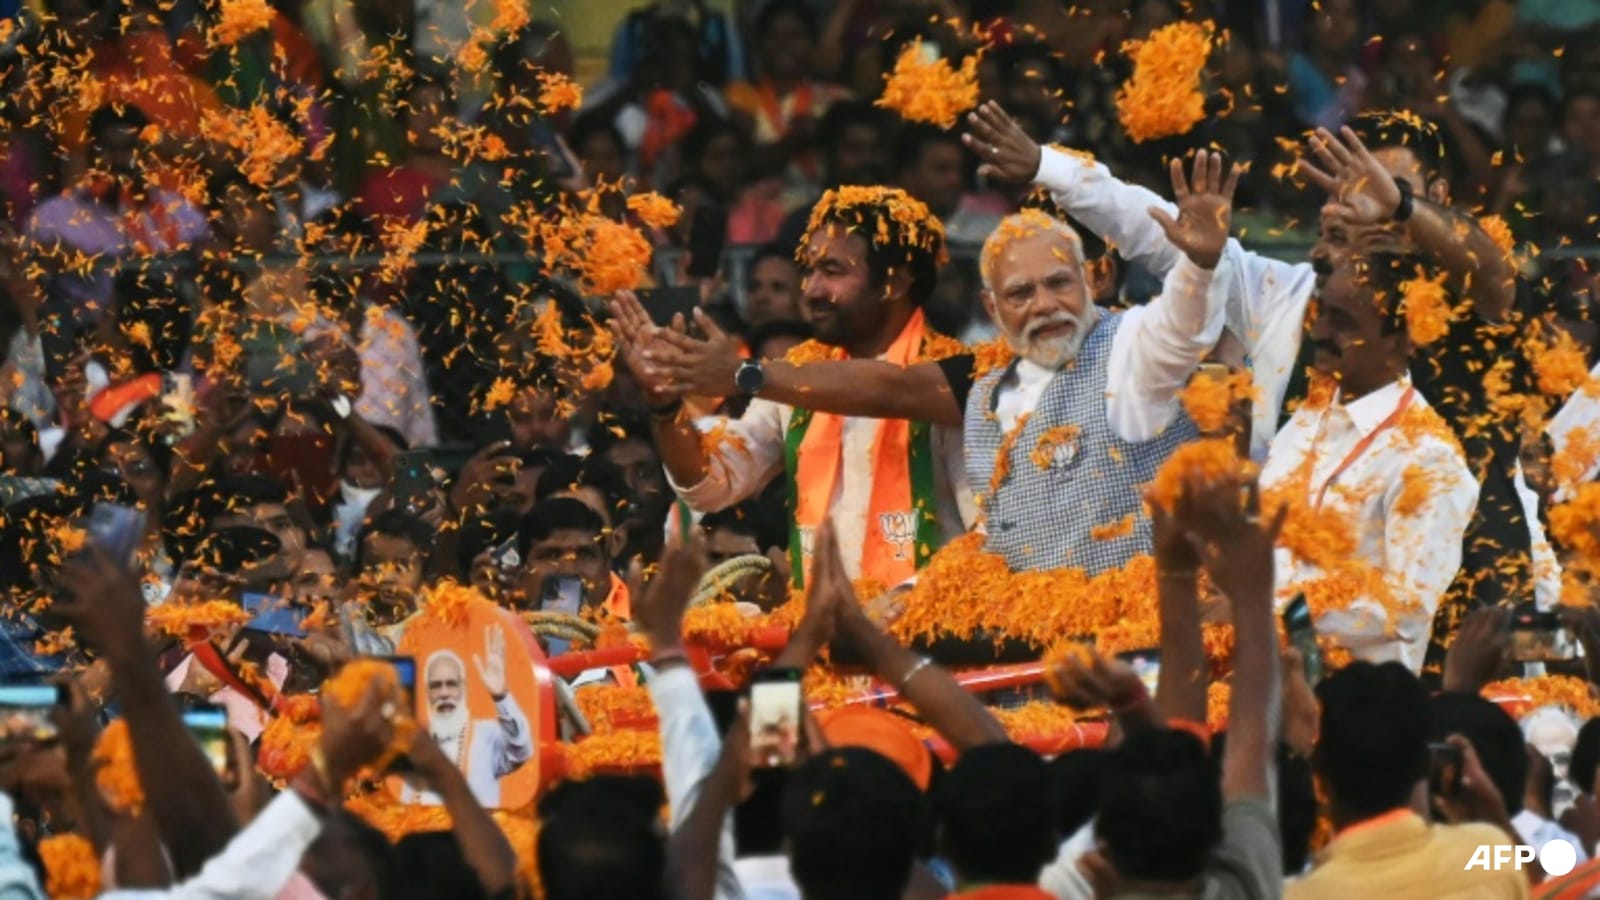 Commentary: Modi is making India election all about himself